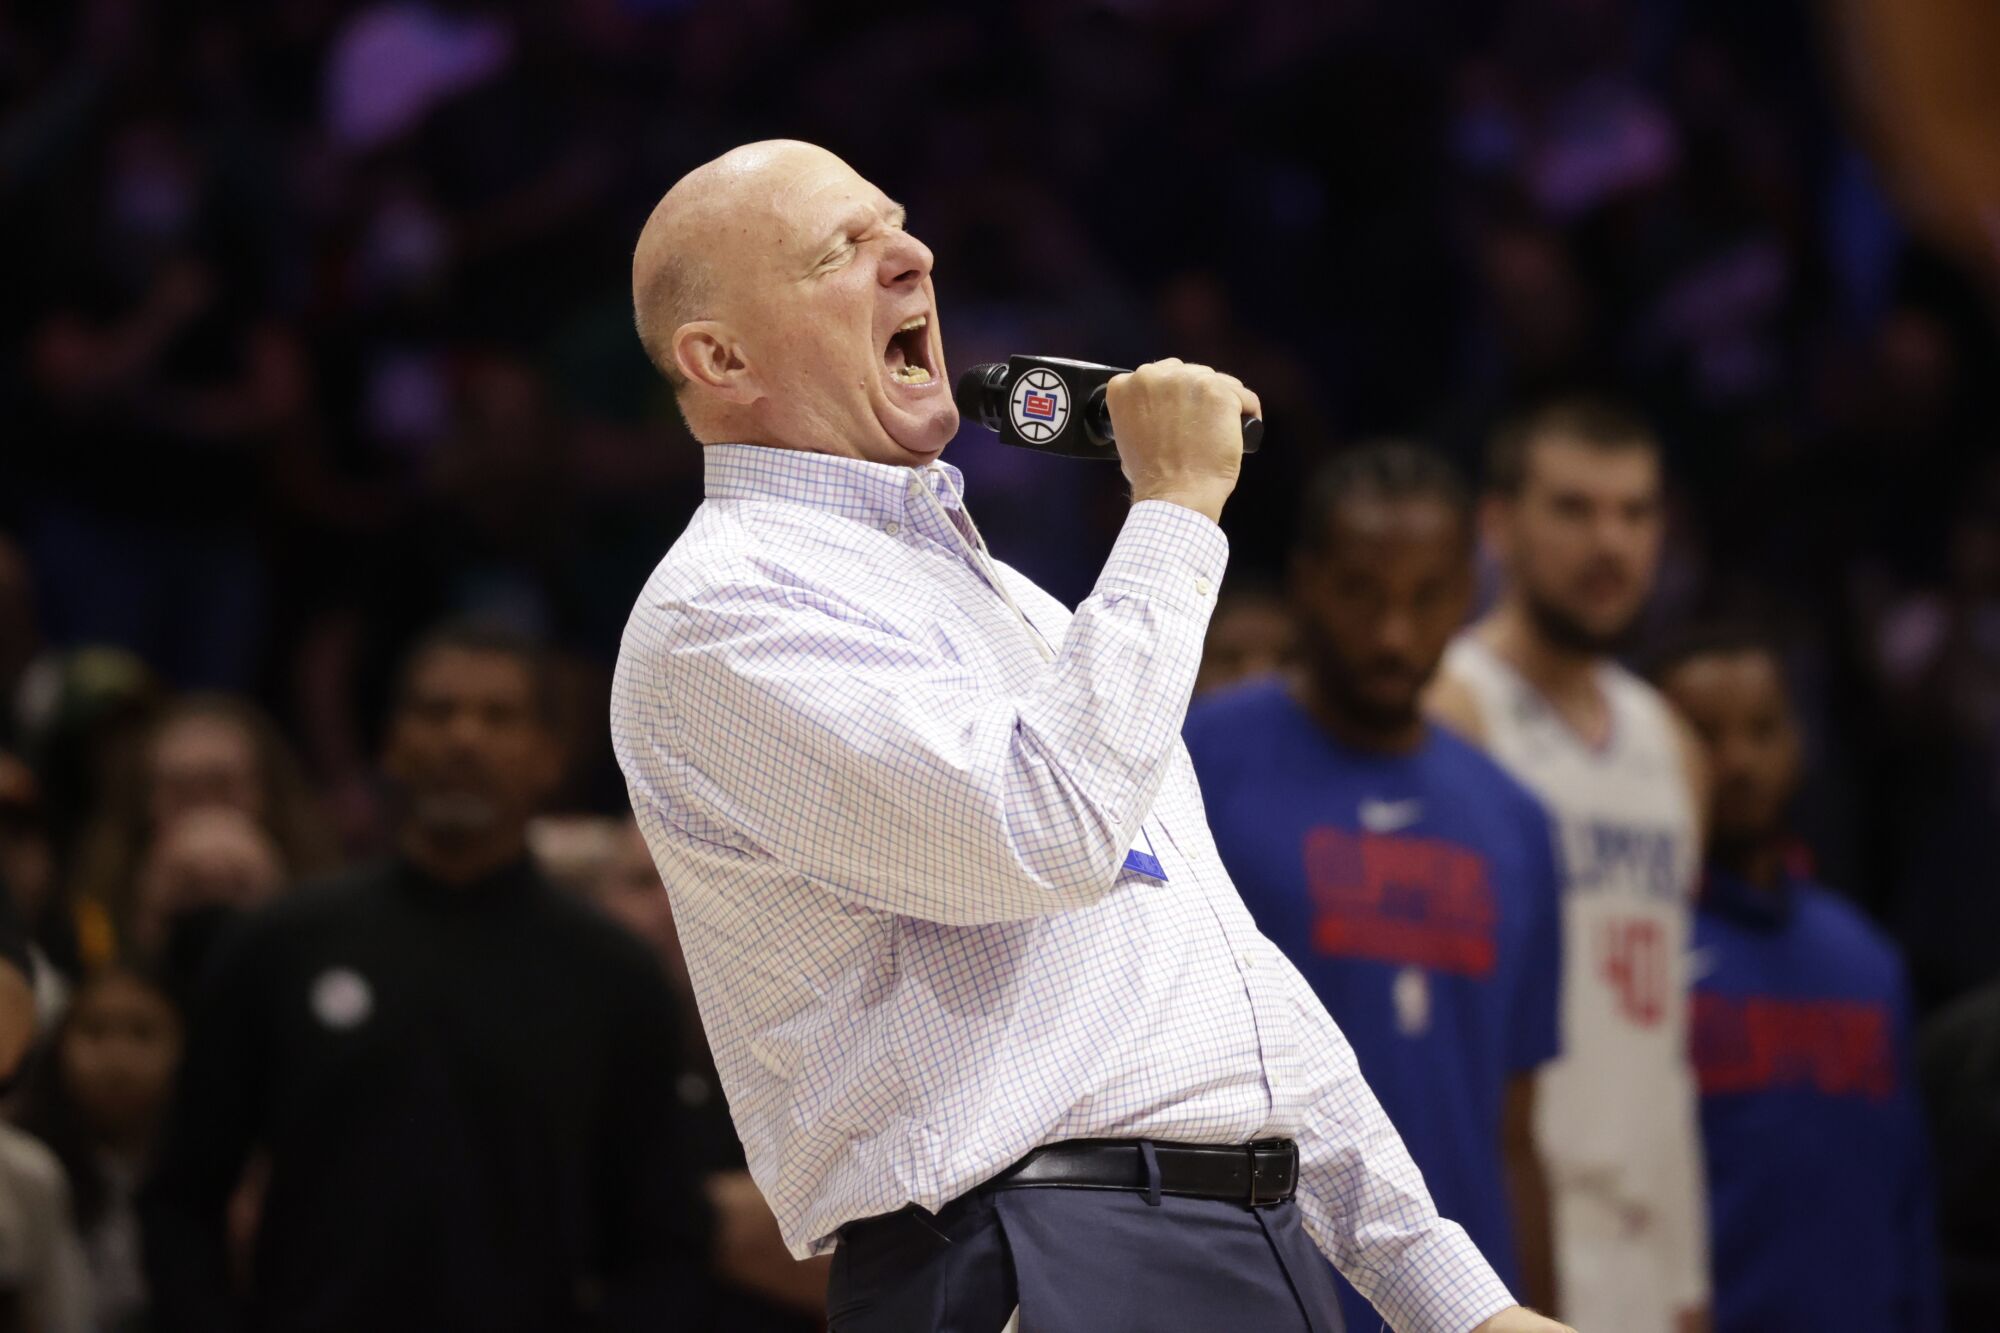 Clippers owner Steve Ballmer welcomes fans to a preseason game between the Clippers and Portland Trail Blazers.